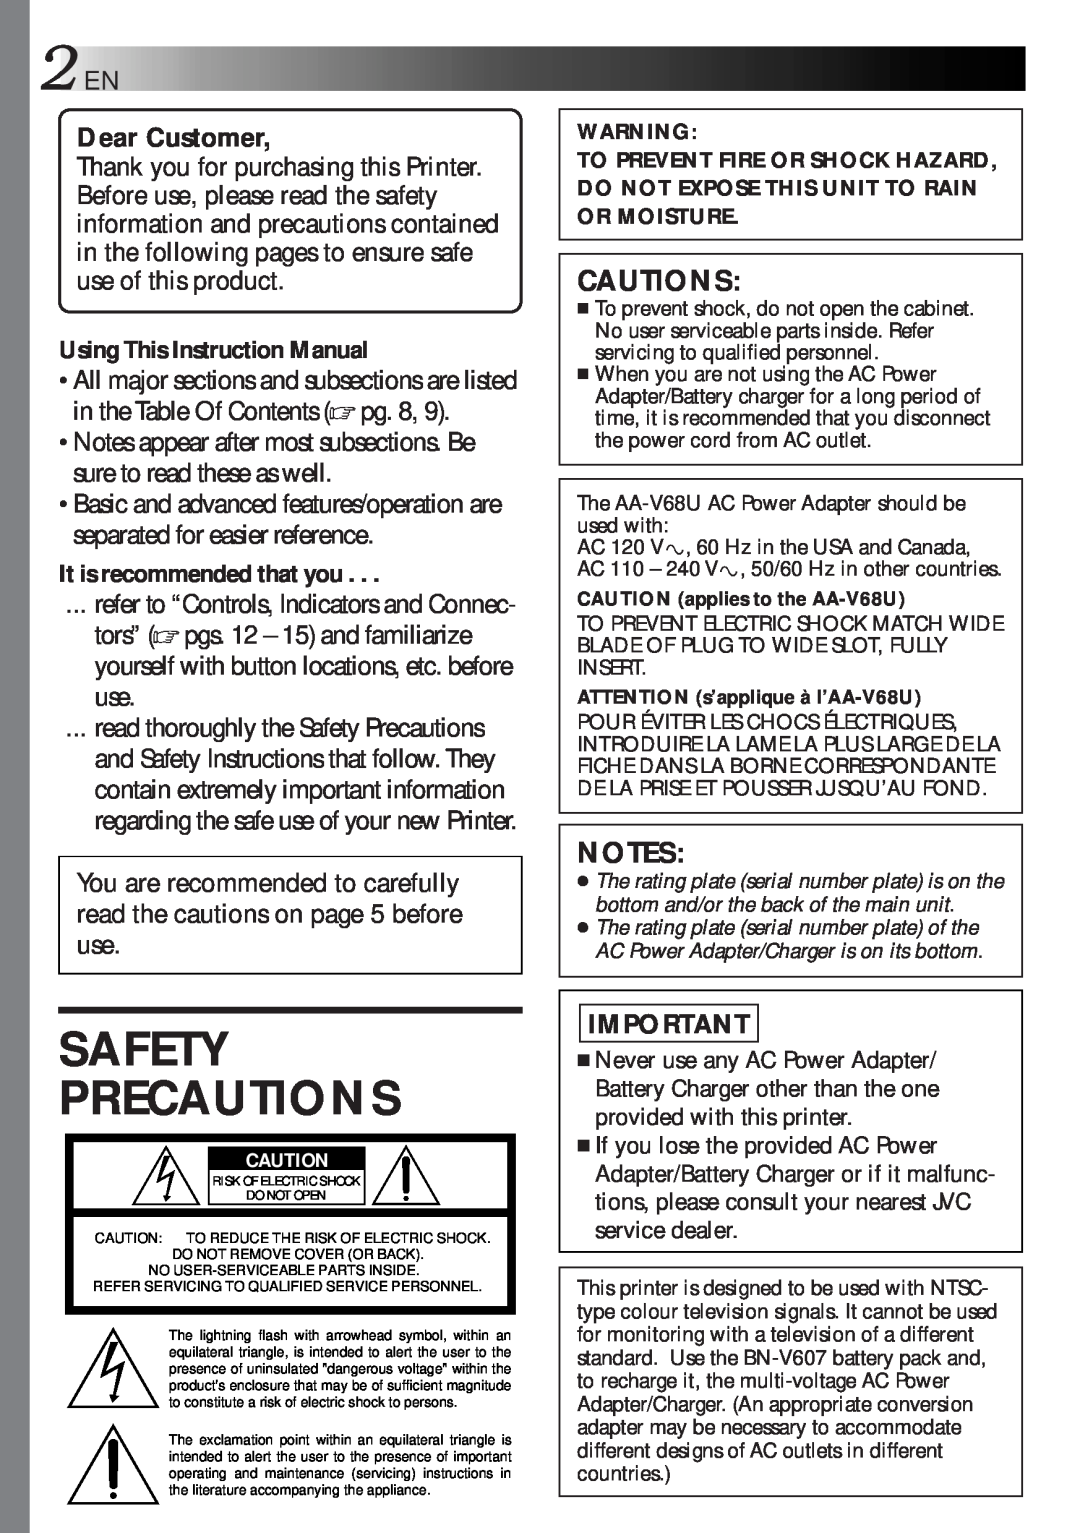 JVC GV-HT1U manual Safety Precautions, Dear Customer, Cautions, Using This Instruction Manual, It is recommended that you 